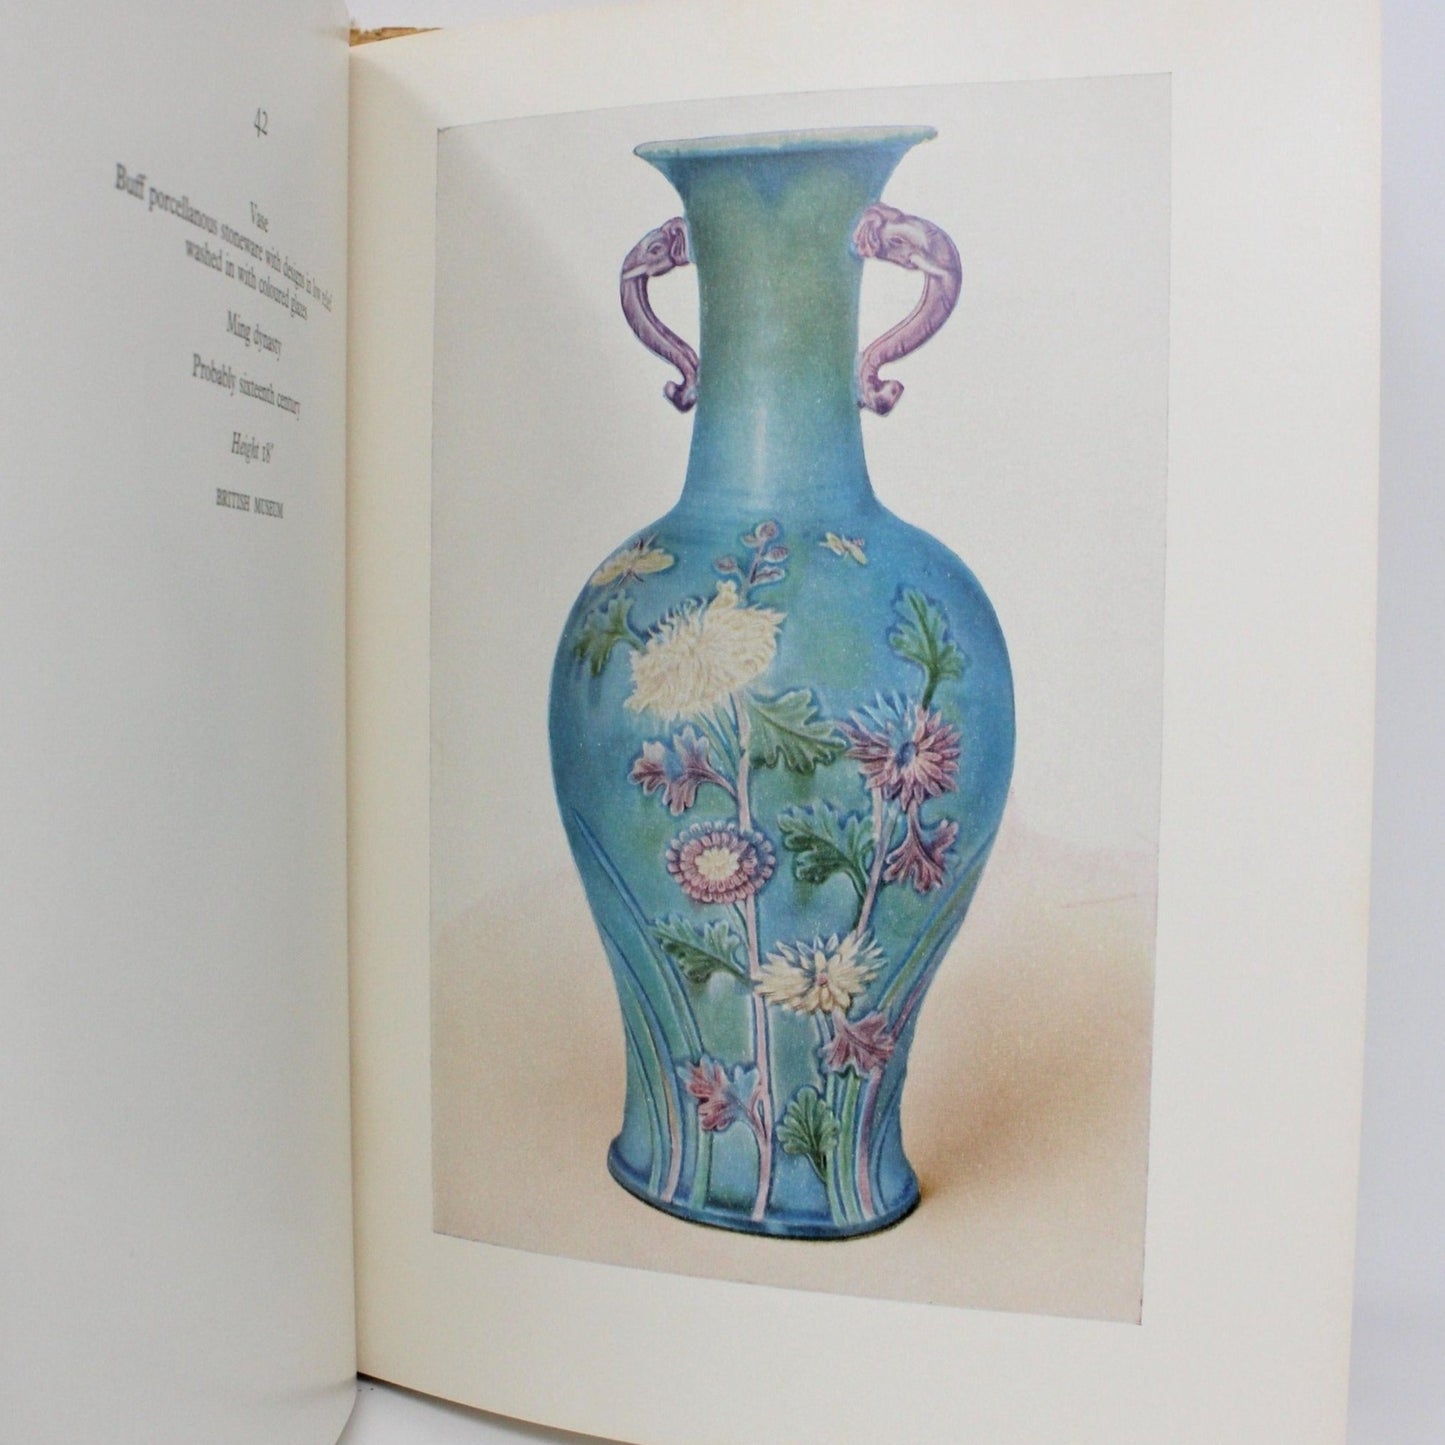 Book, Chinese Art, H L Hobson, Hardcover 1964 Spring Books. London